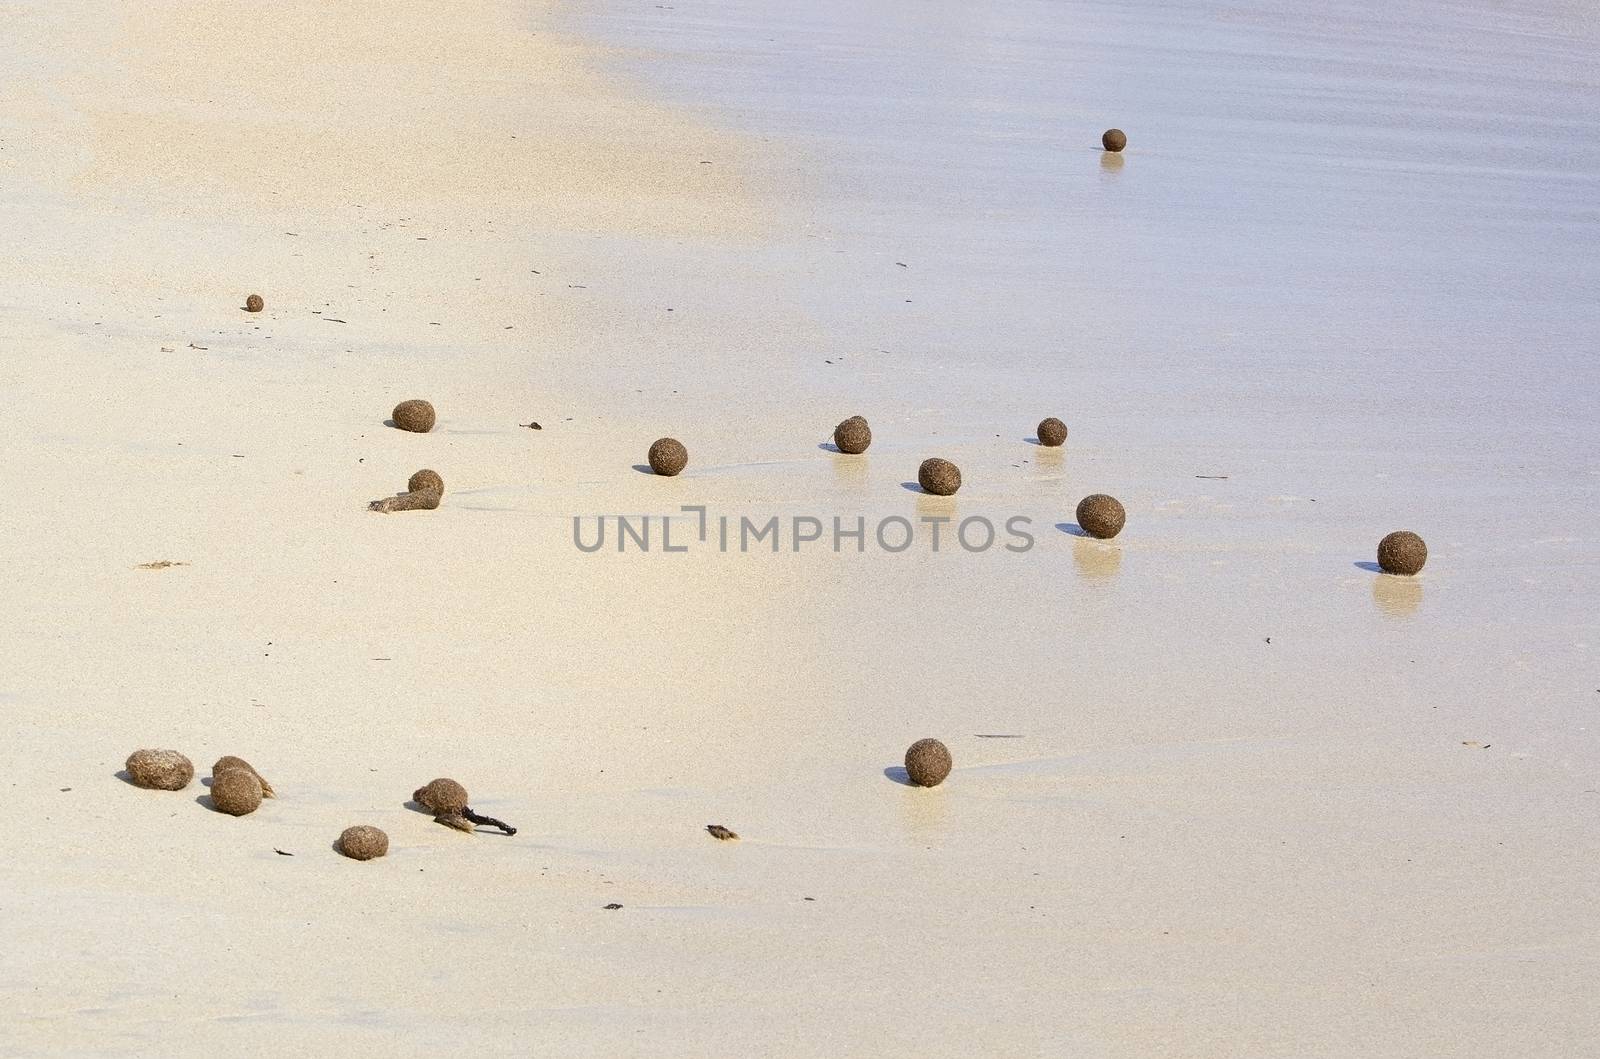 Fiber balls of seagrass washed up on sandy beach in Mallorca, Spain.